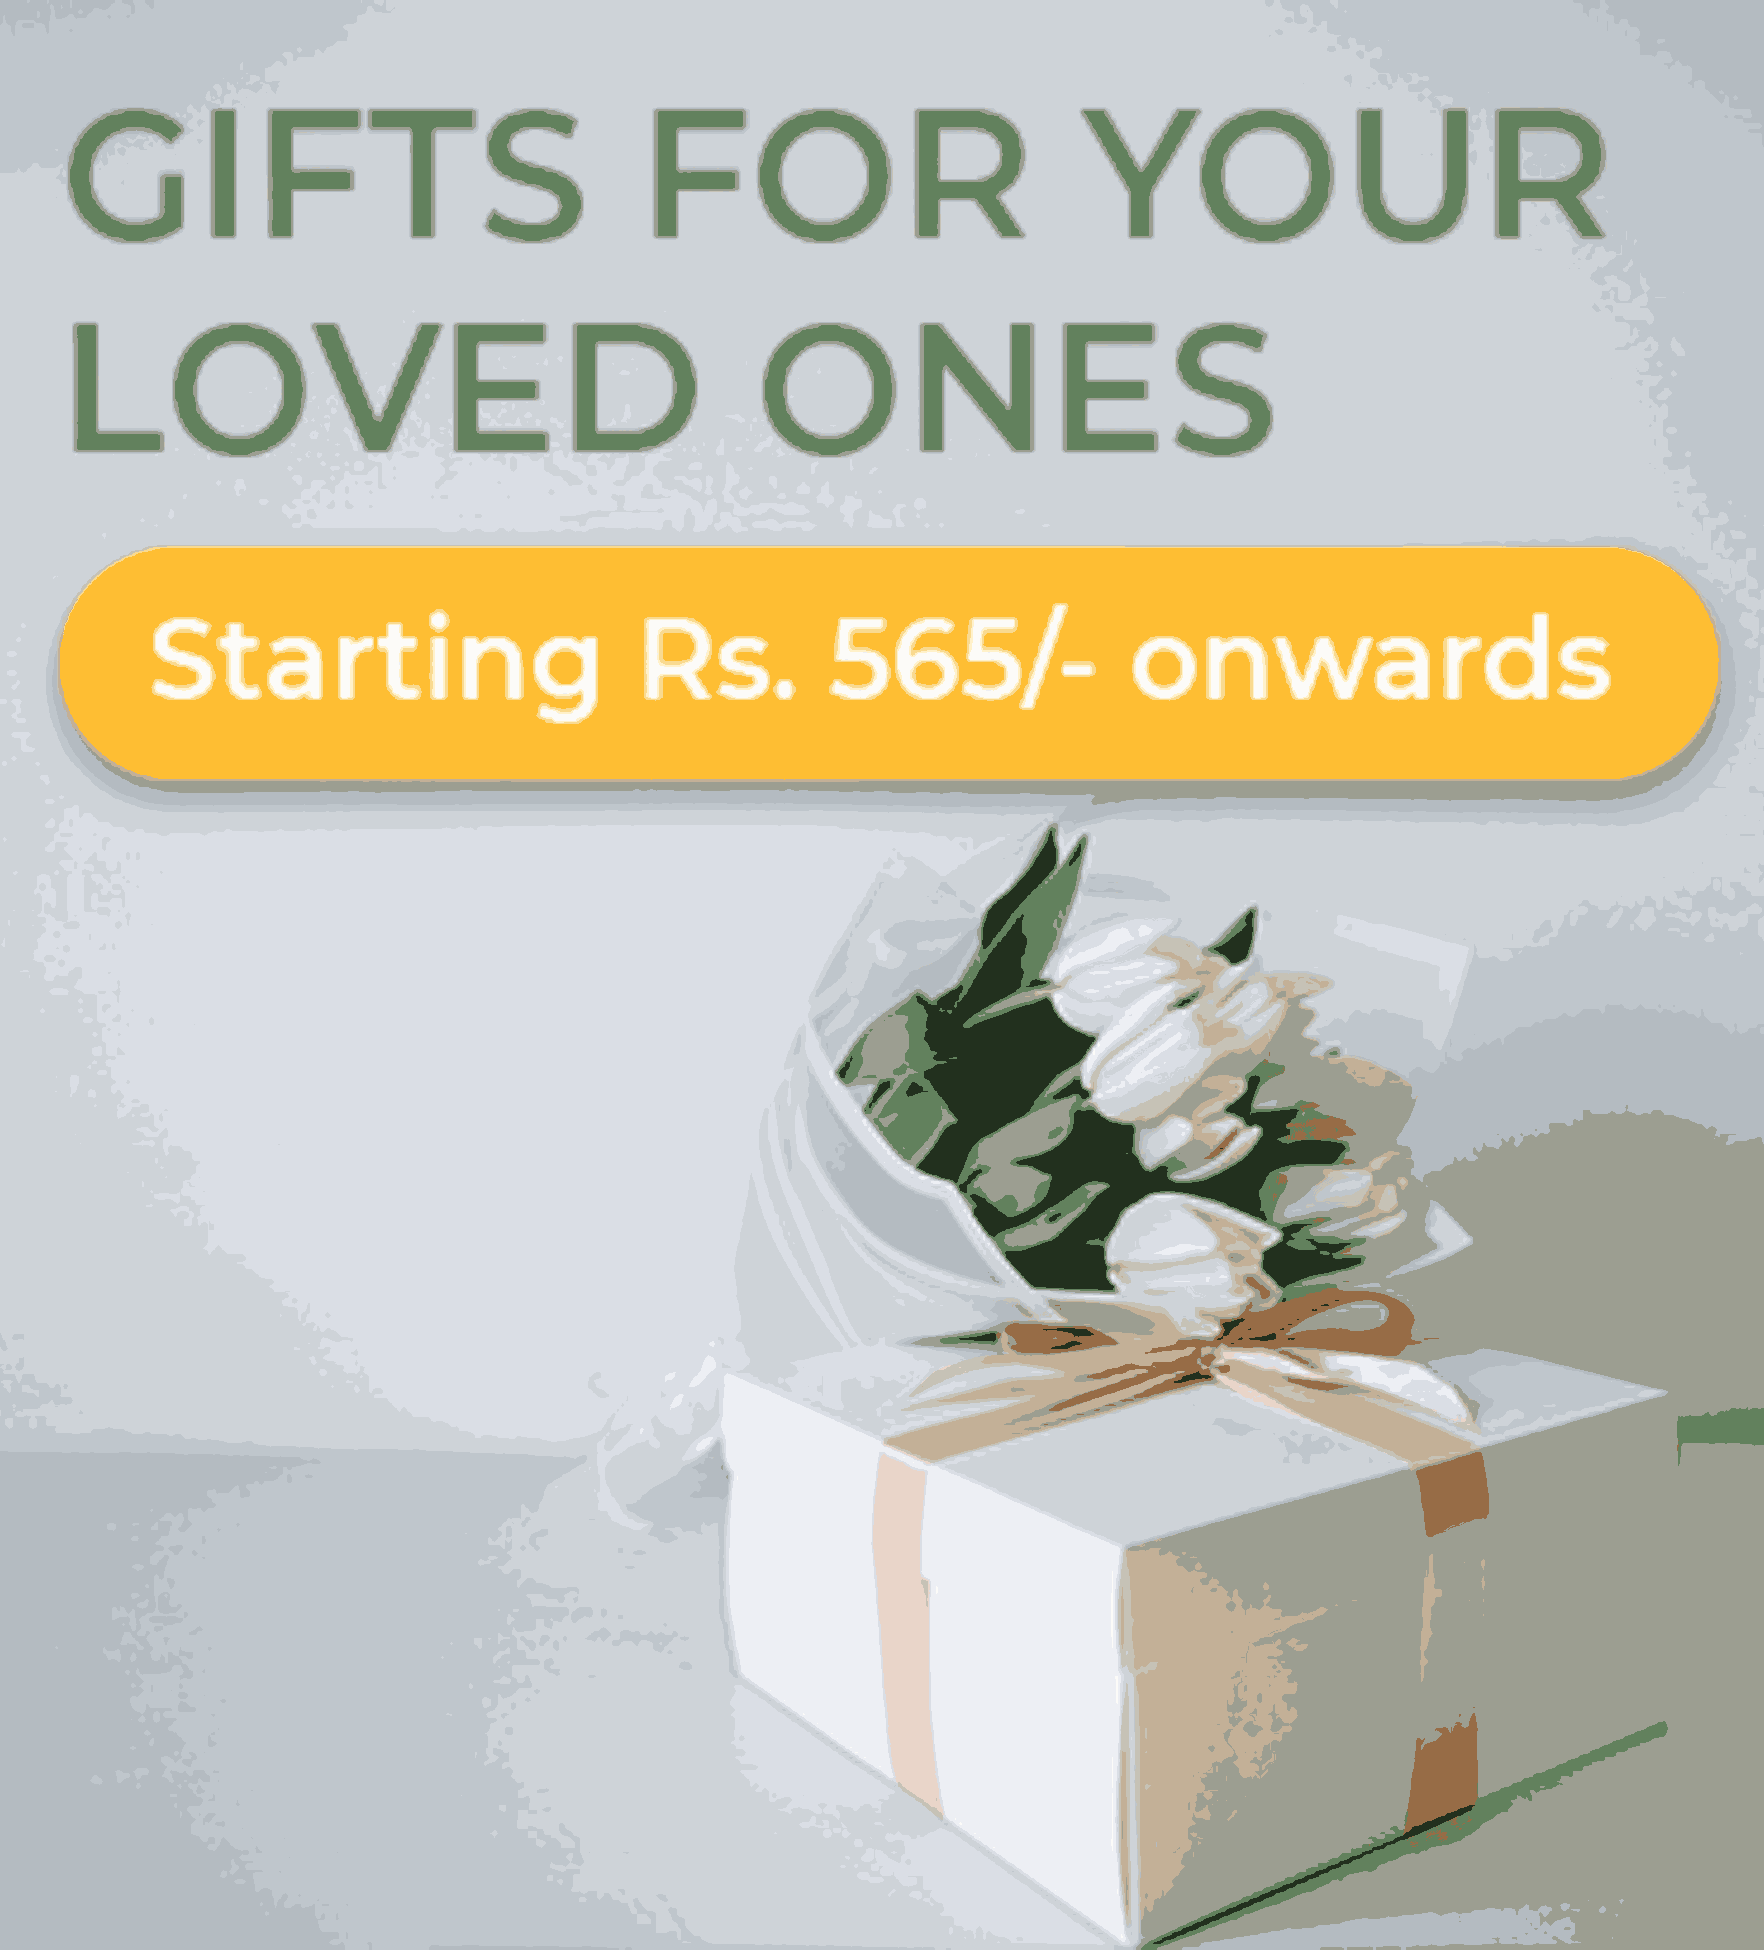 Present your loved ones with something thoughtful